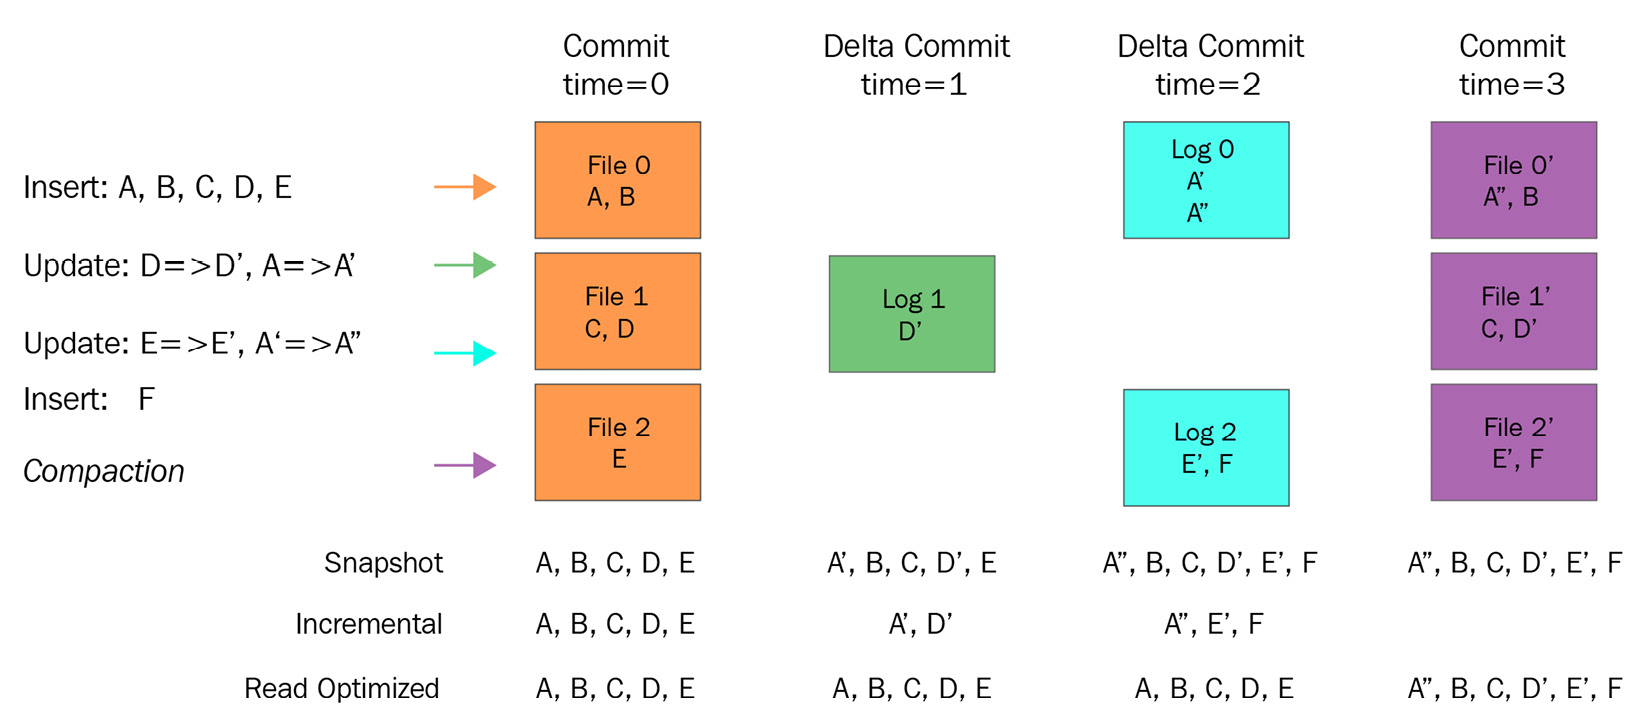 Figure 11.2 – Amazon Hudi MoR commit flow (Source: https://cwiki.apache.org/confluence/display/HUDI/Design+And+Architecture)
